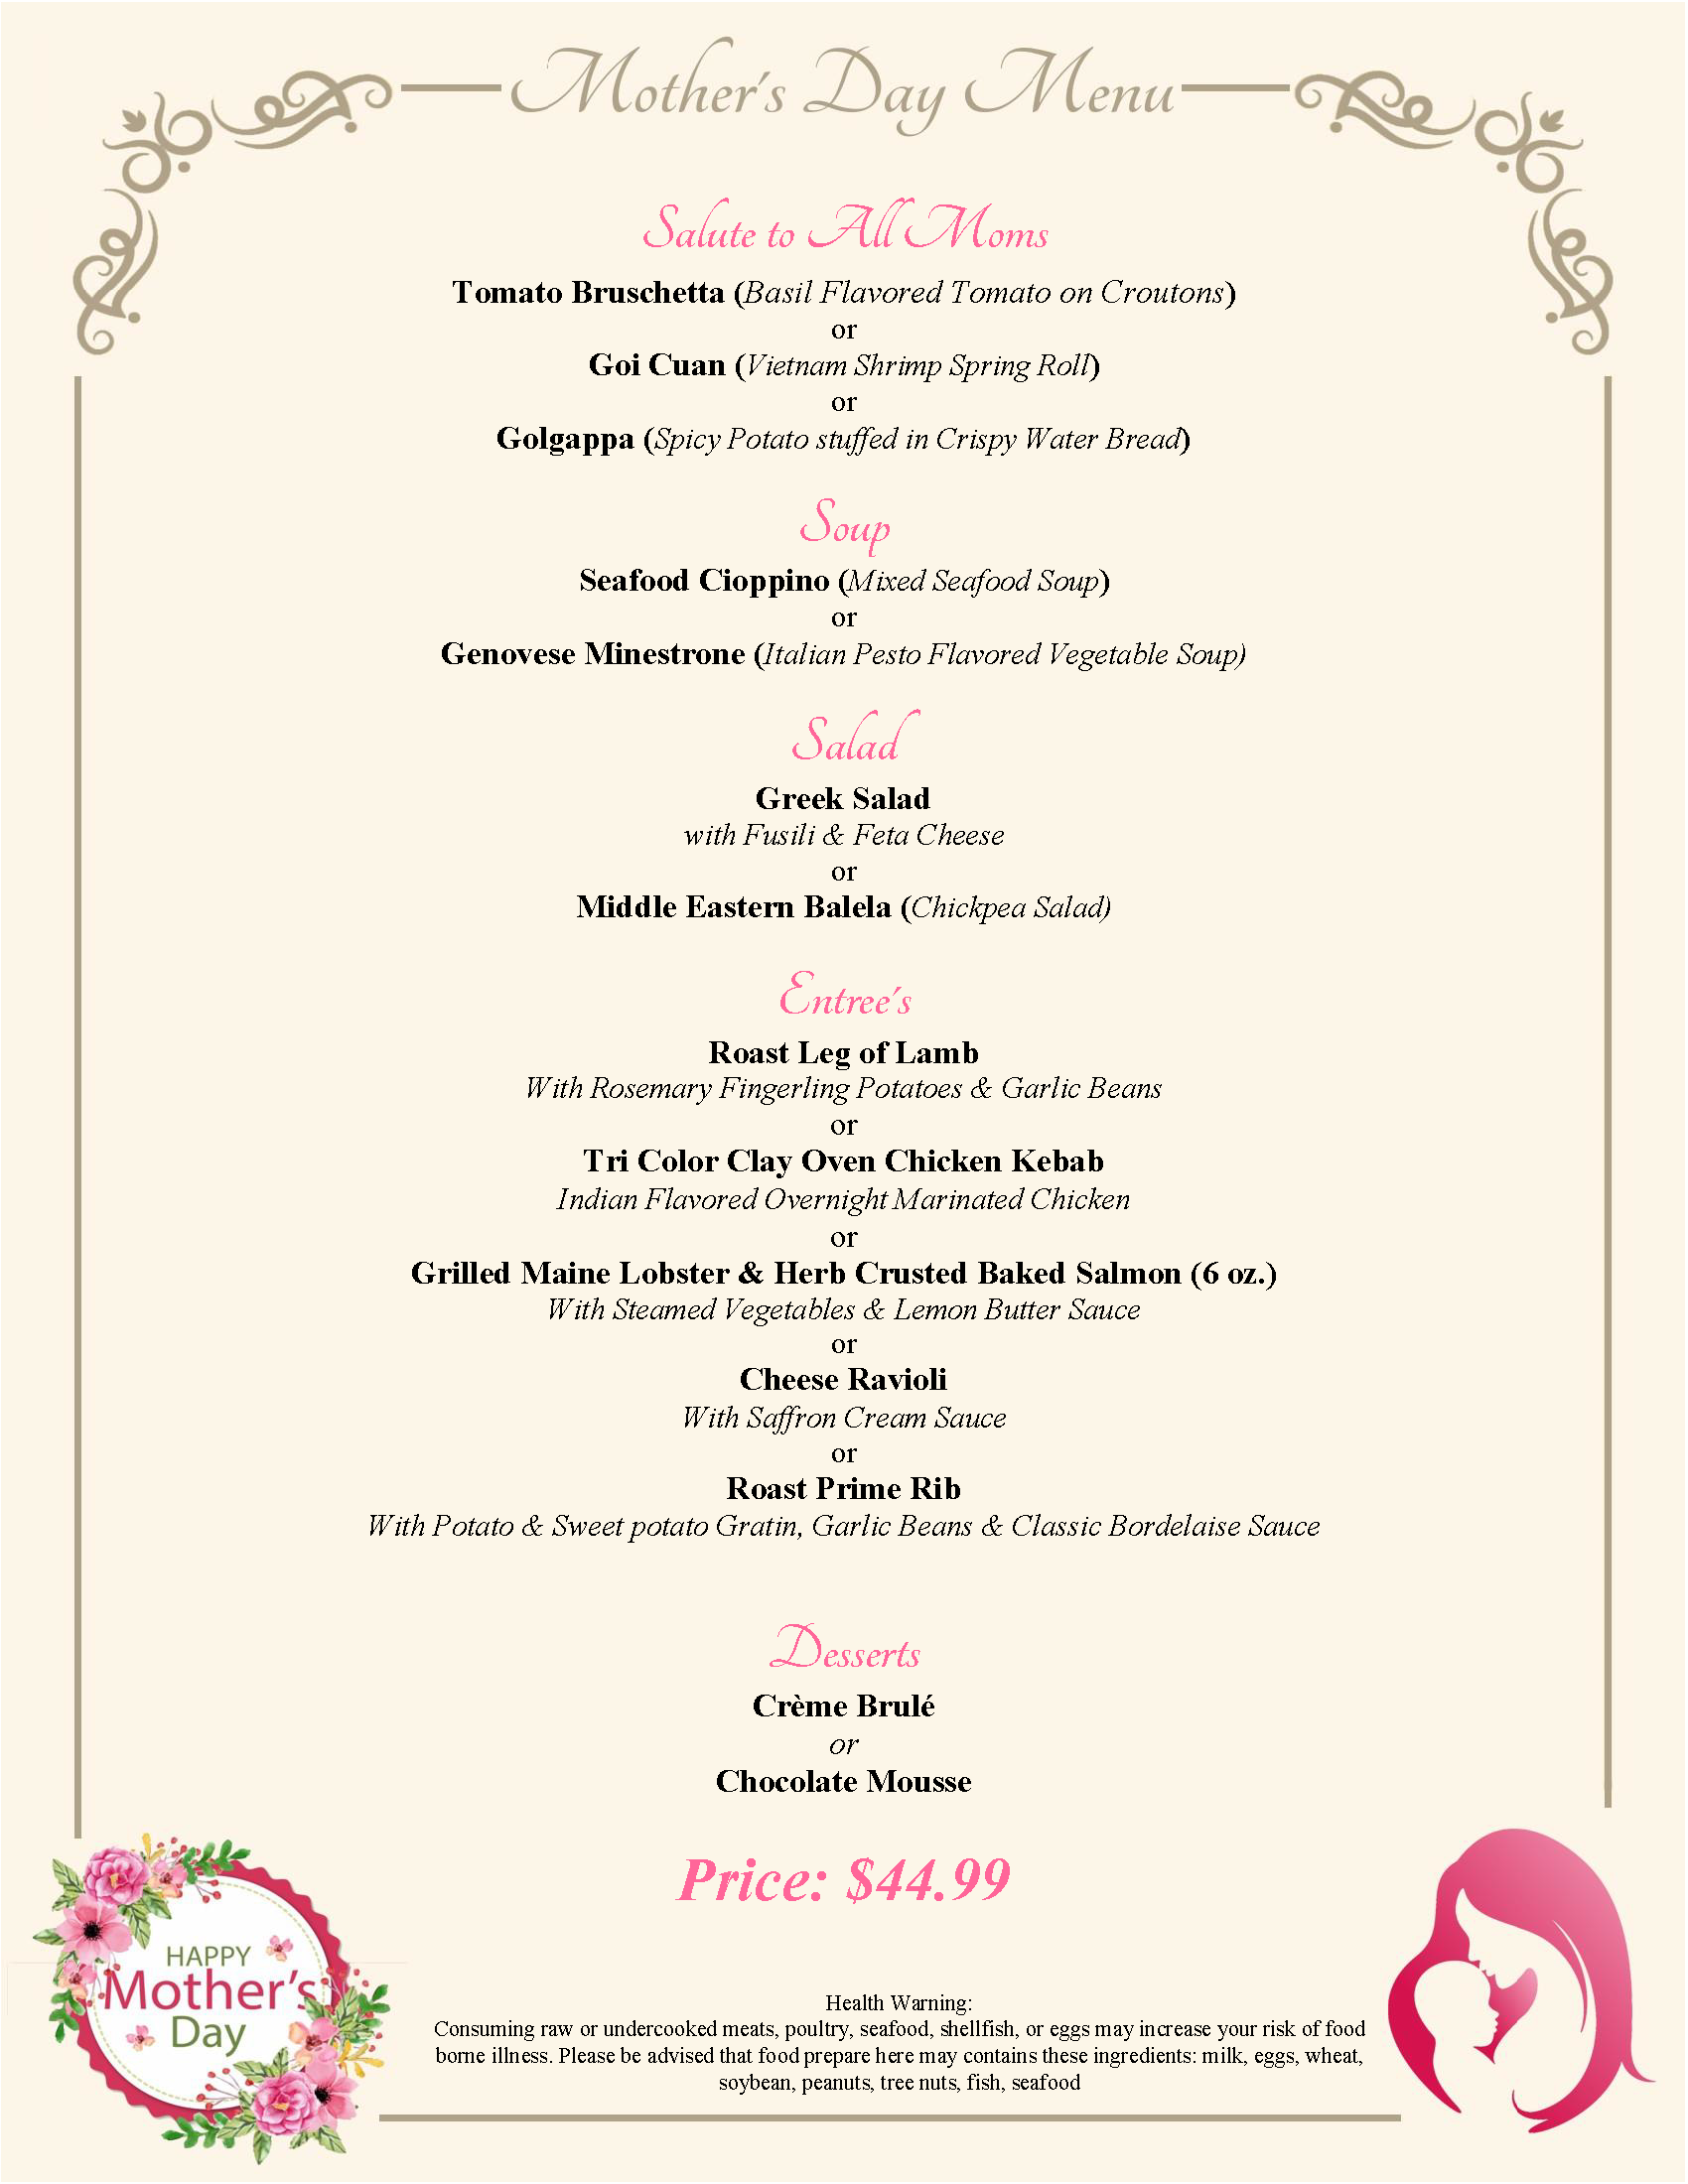 Mothers Day Menu for Sunset Bar & Grille in Trinidad, Colorado